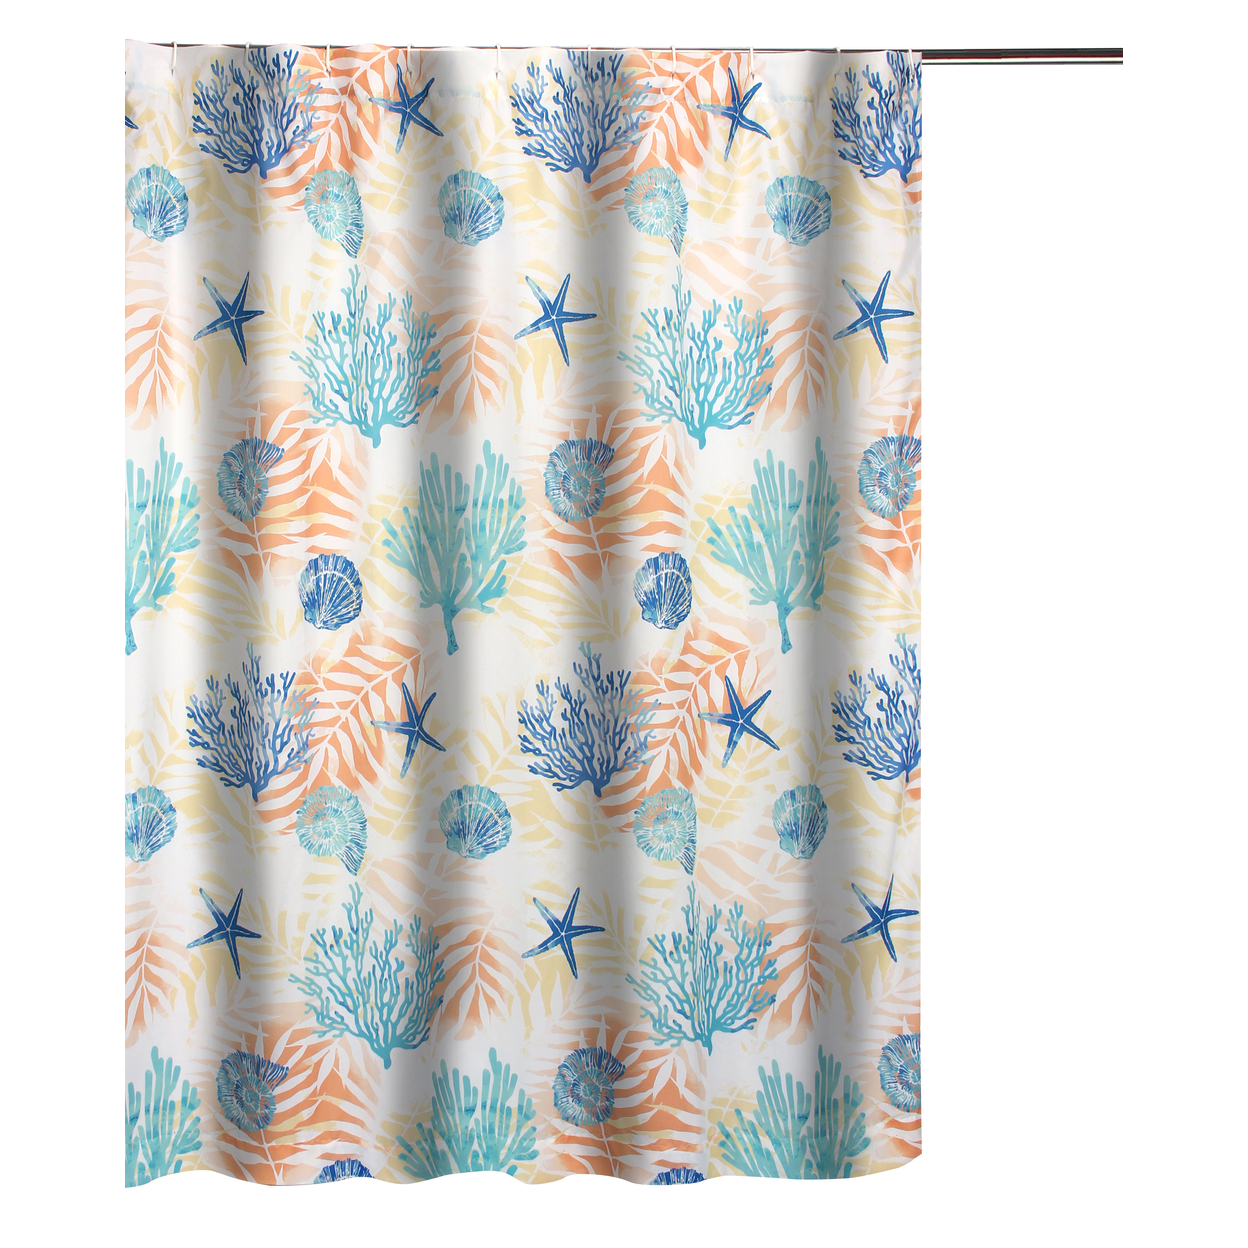 Geo 72 Inch Shower Curtain, White Blue Polyester, Seashells And Ferns Print